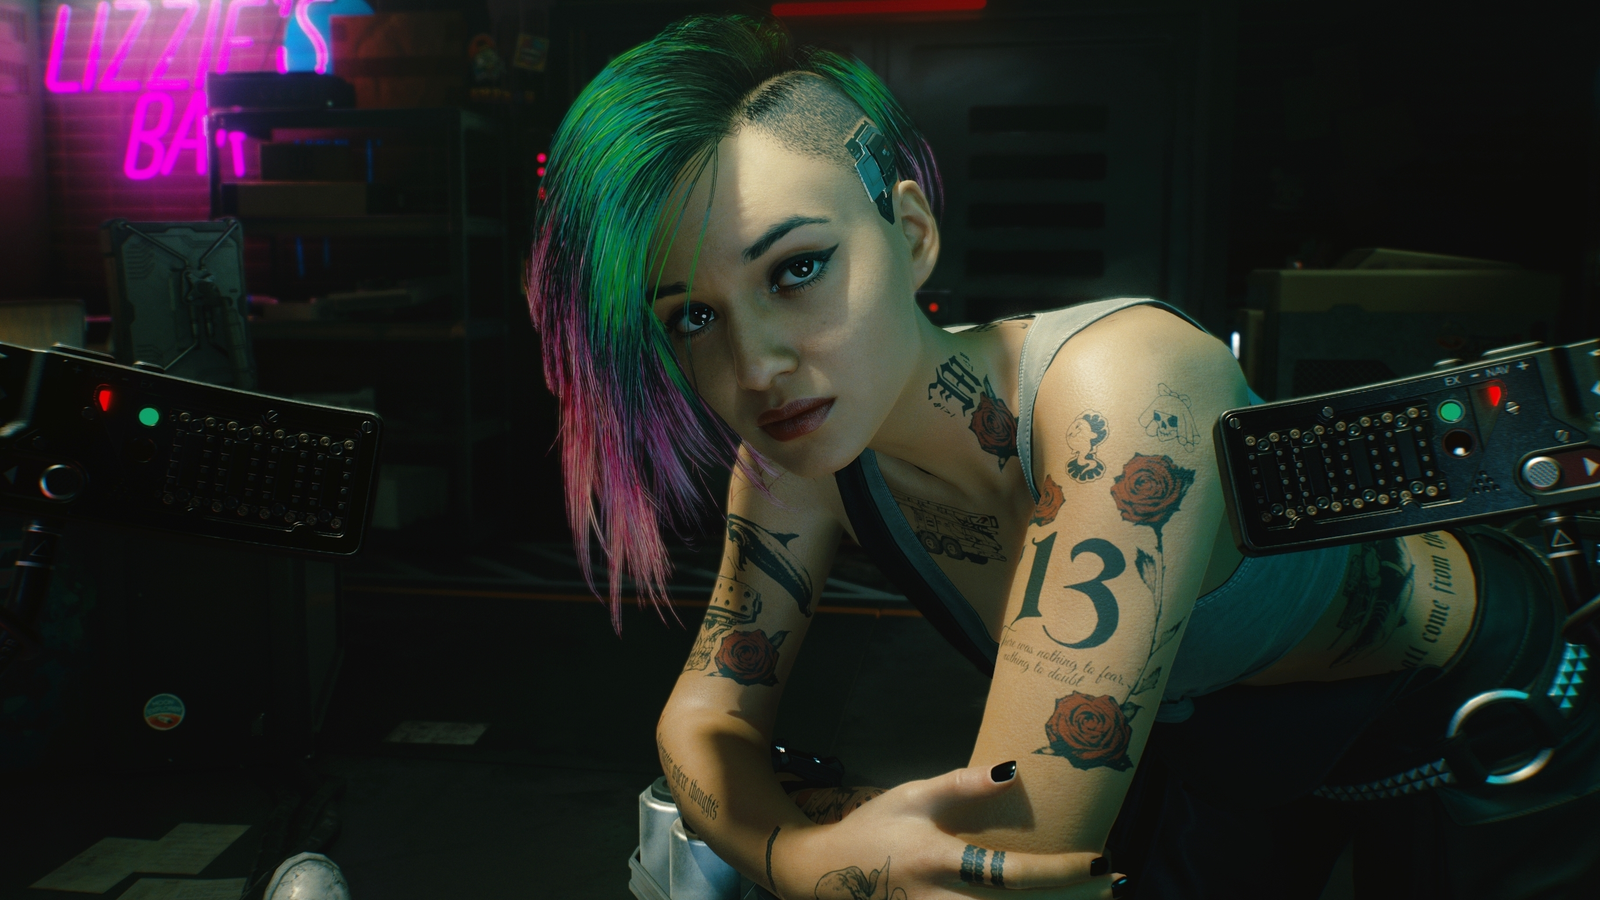 we-played-cyberpunk-2077-for-four-hours-heres-what-we-think-1593086886800.jpg